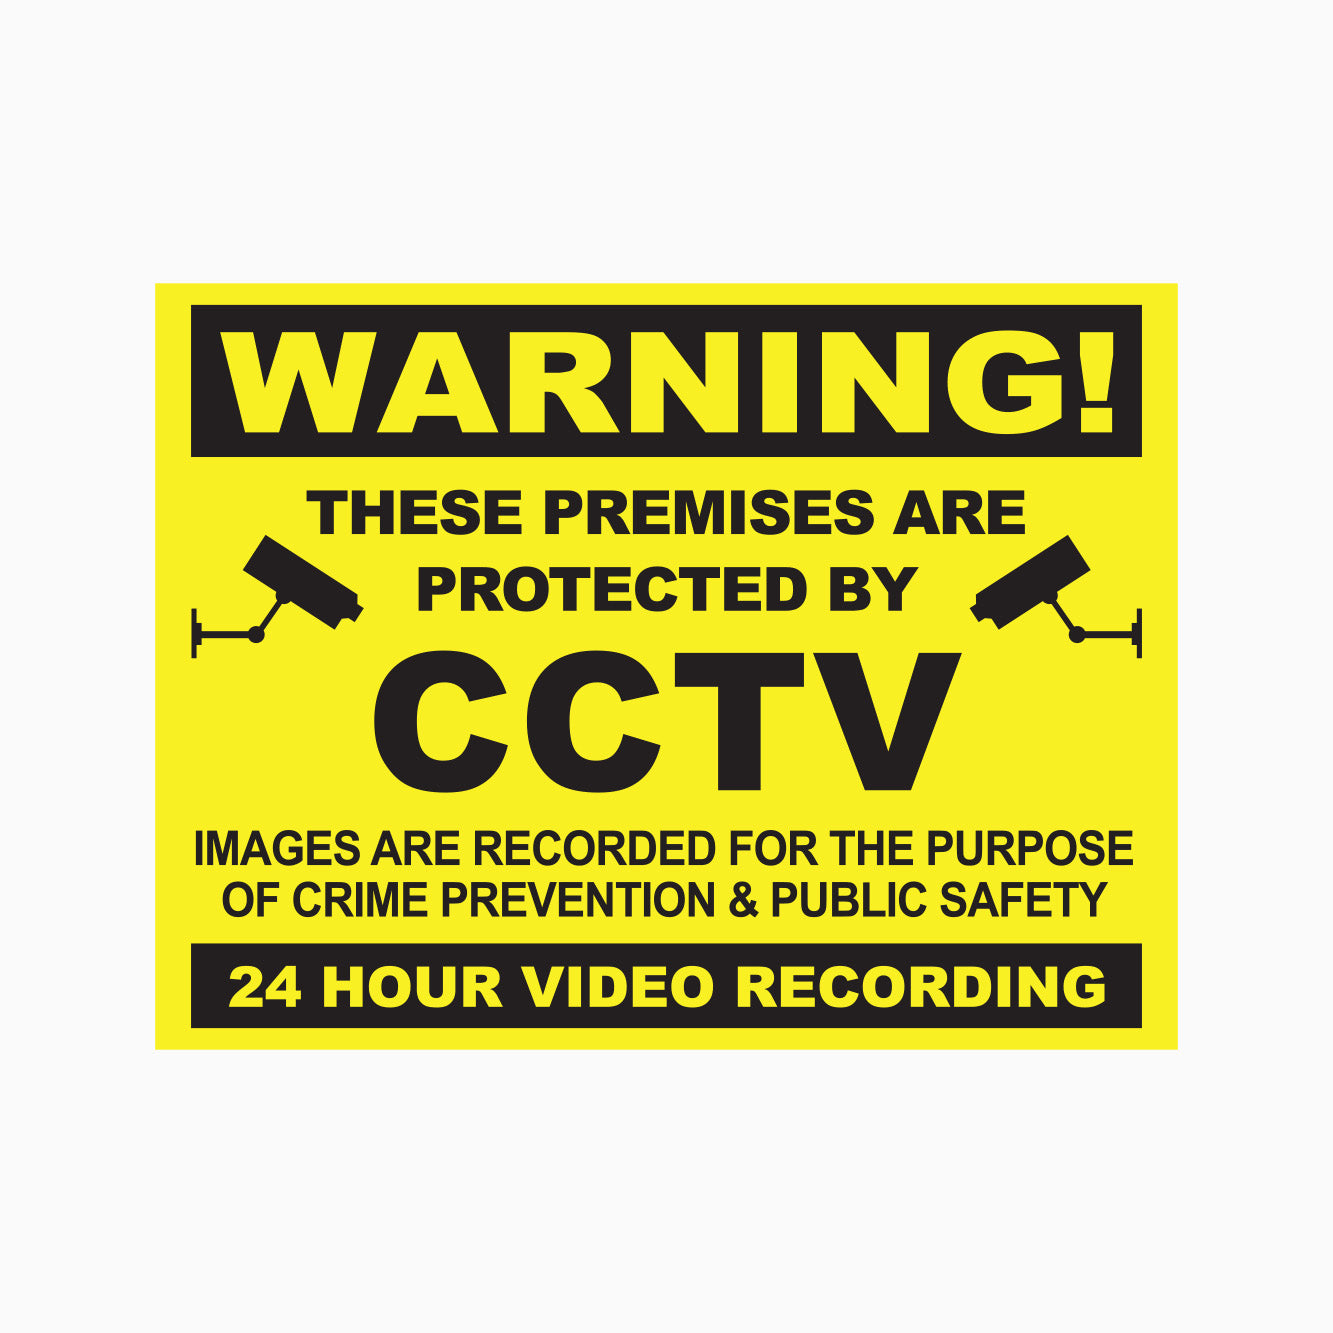 WARNING THESE PREMISES ARE PROTECTED BY CCTV. IMAGES ARE RECORDED FOR THE PURPOSE OF CRIME PREVENTION & PUBLIC SAFETY. 24 HOUR VIDEO RECORDING SIGN